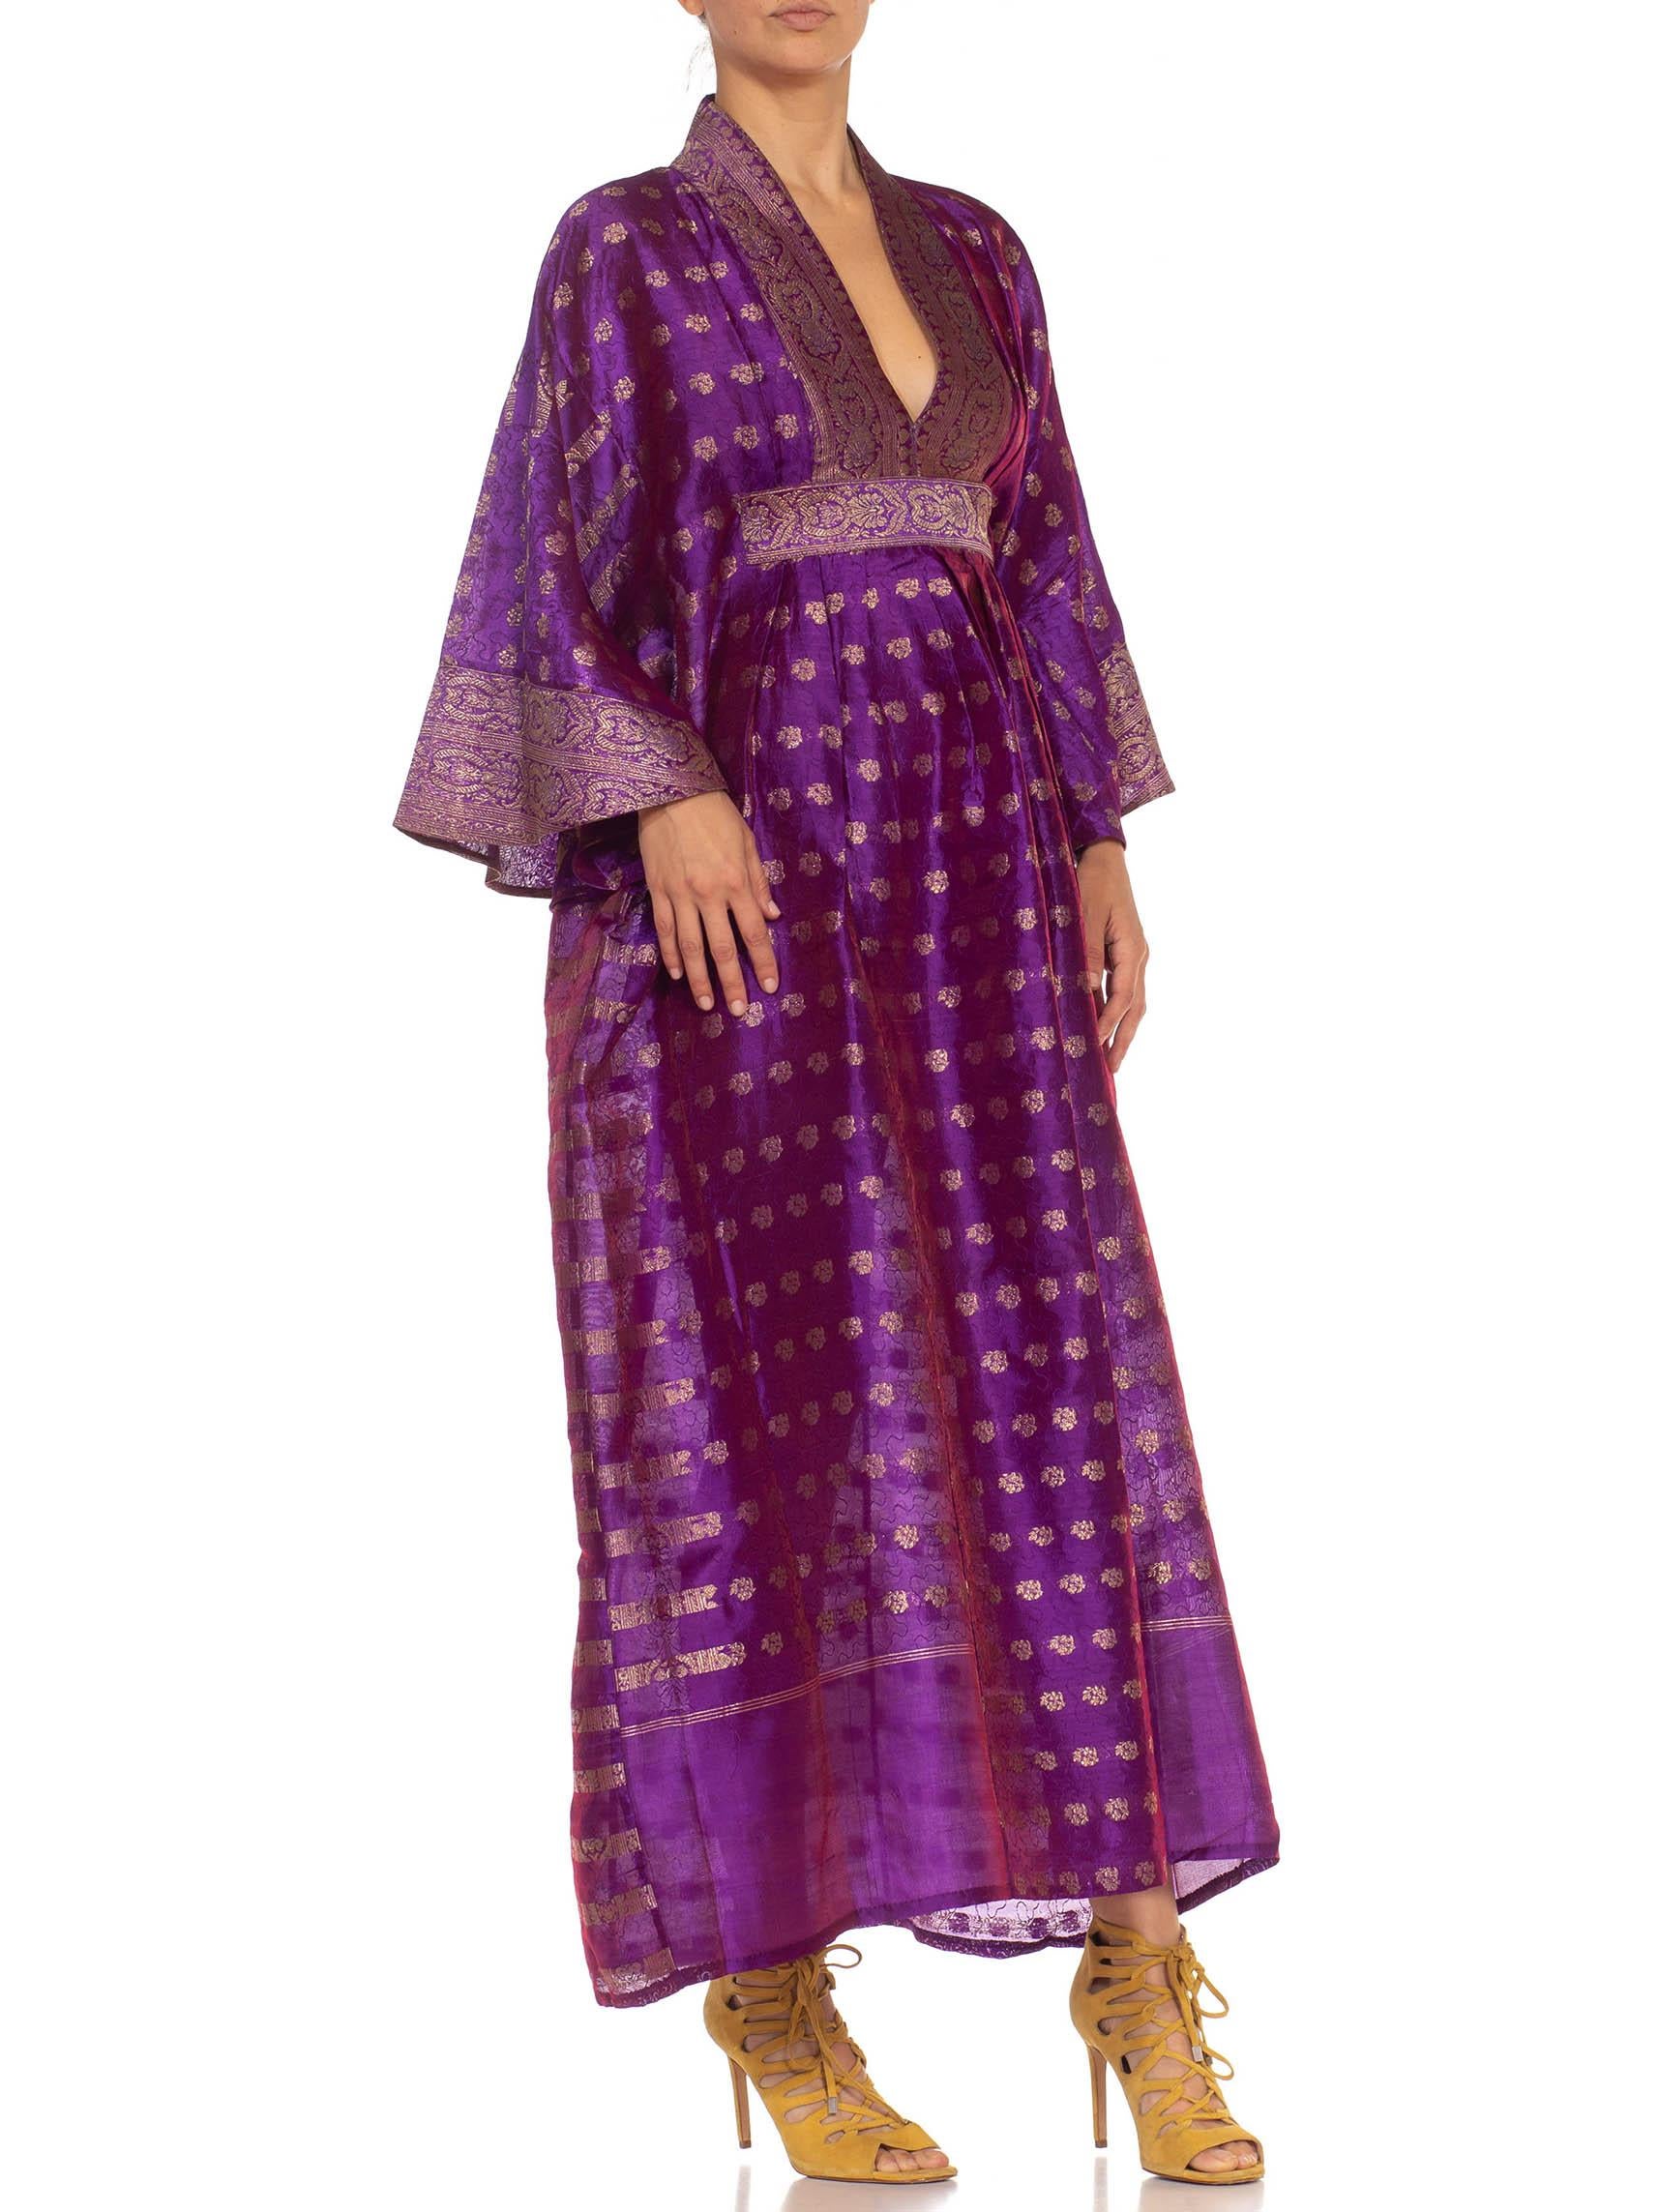 MORPHEW COLLECTION Purple & Gold Silk Kaftan Made From Vintage Saris For Sale 1